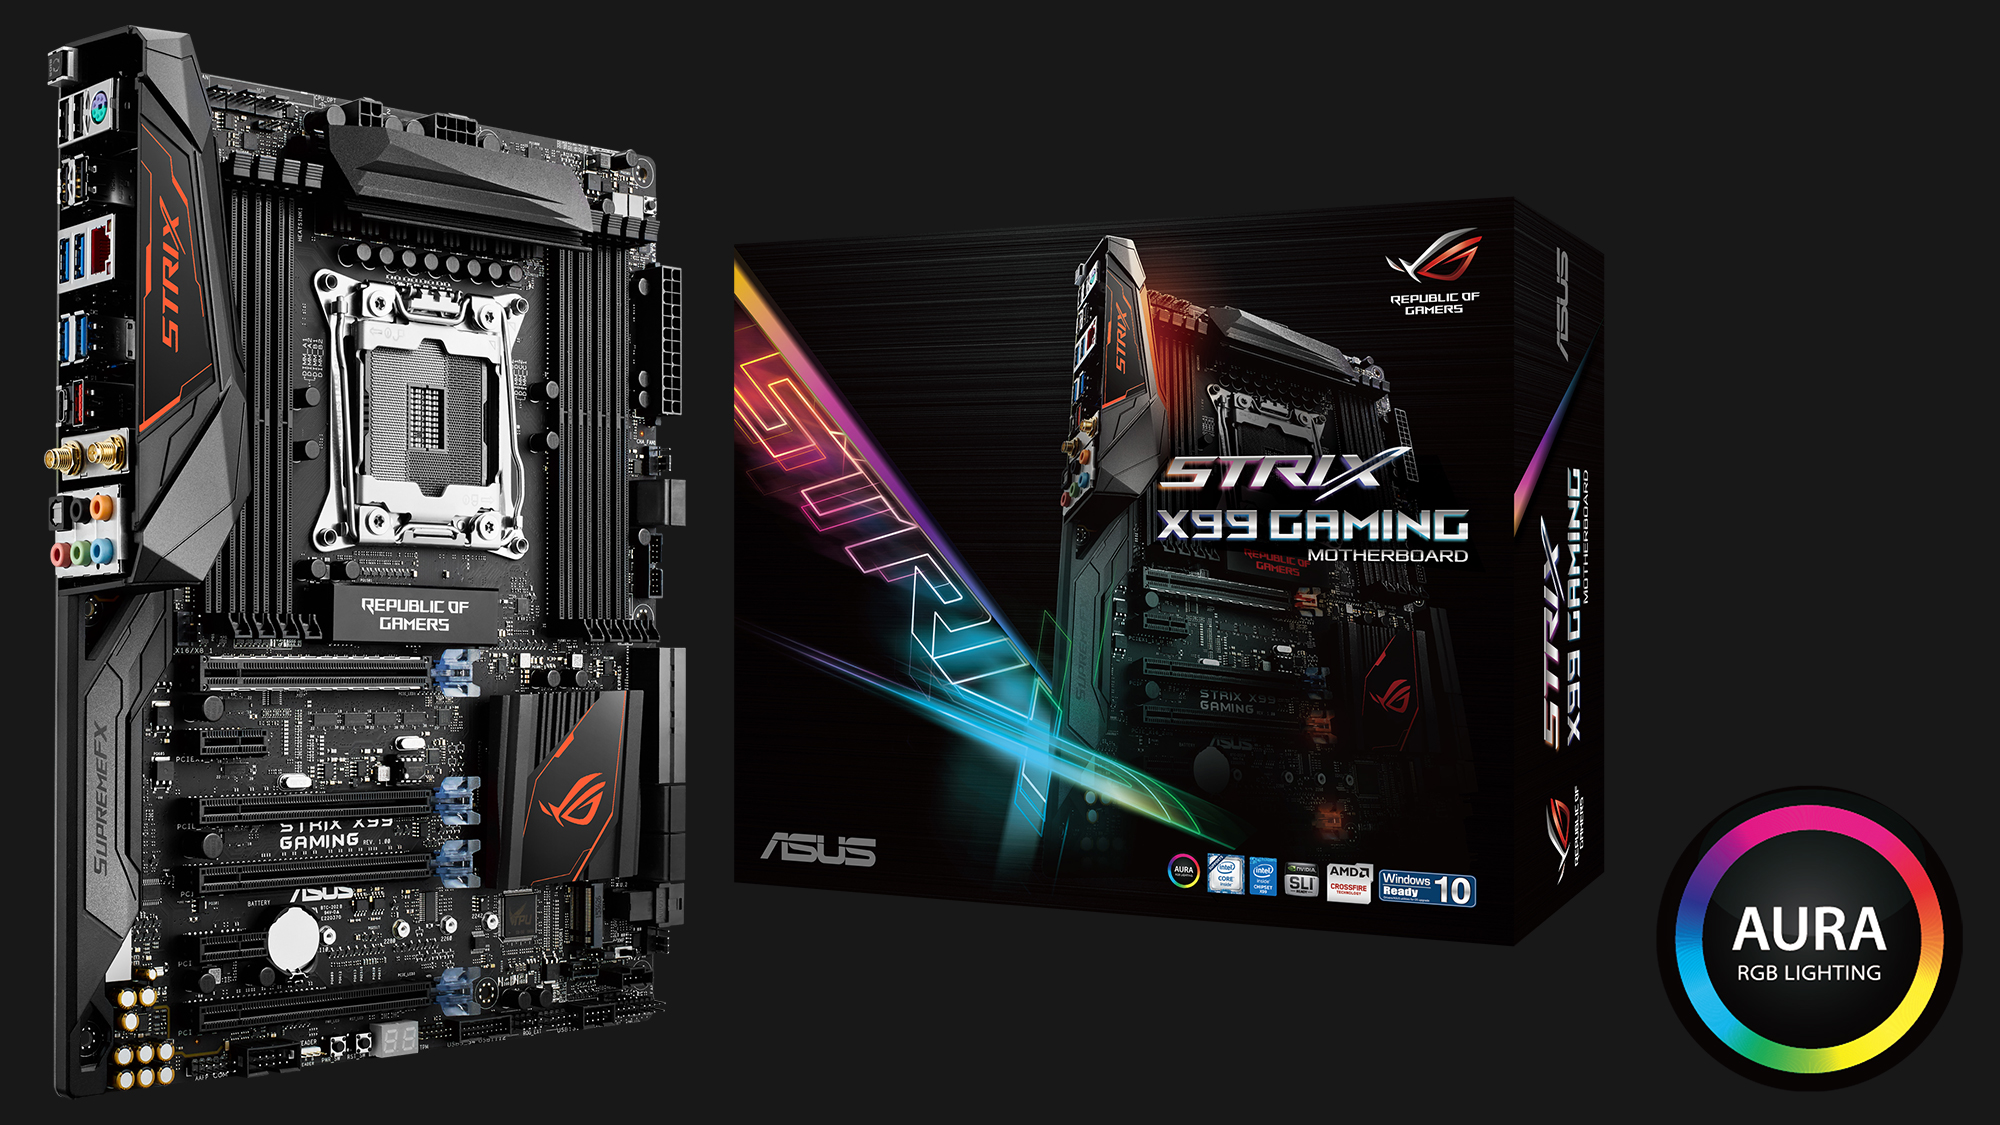 ASUS Announces All-New ROG Strix Motherboards